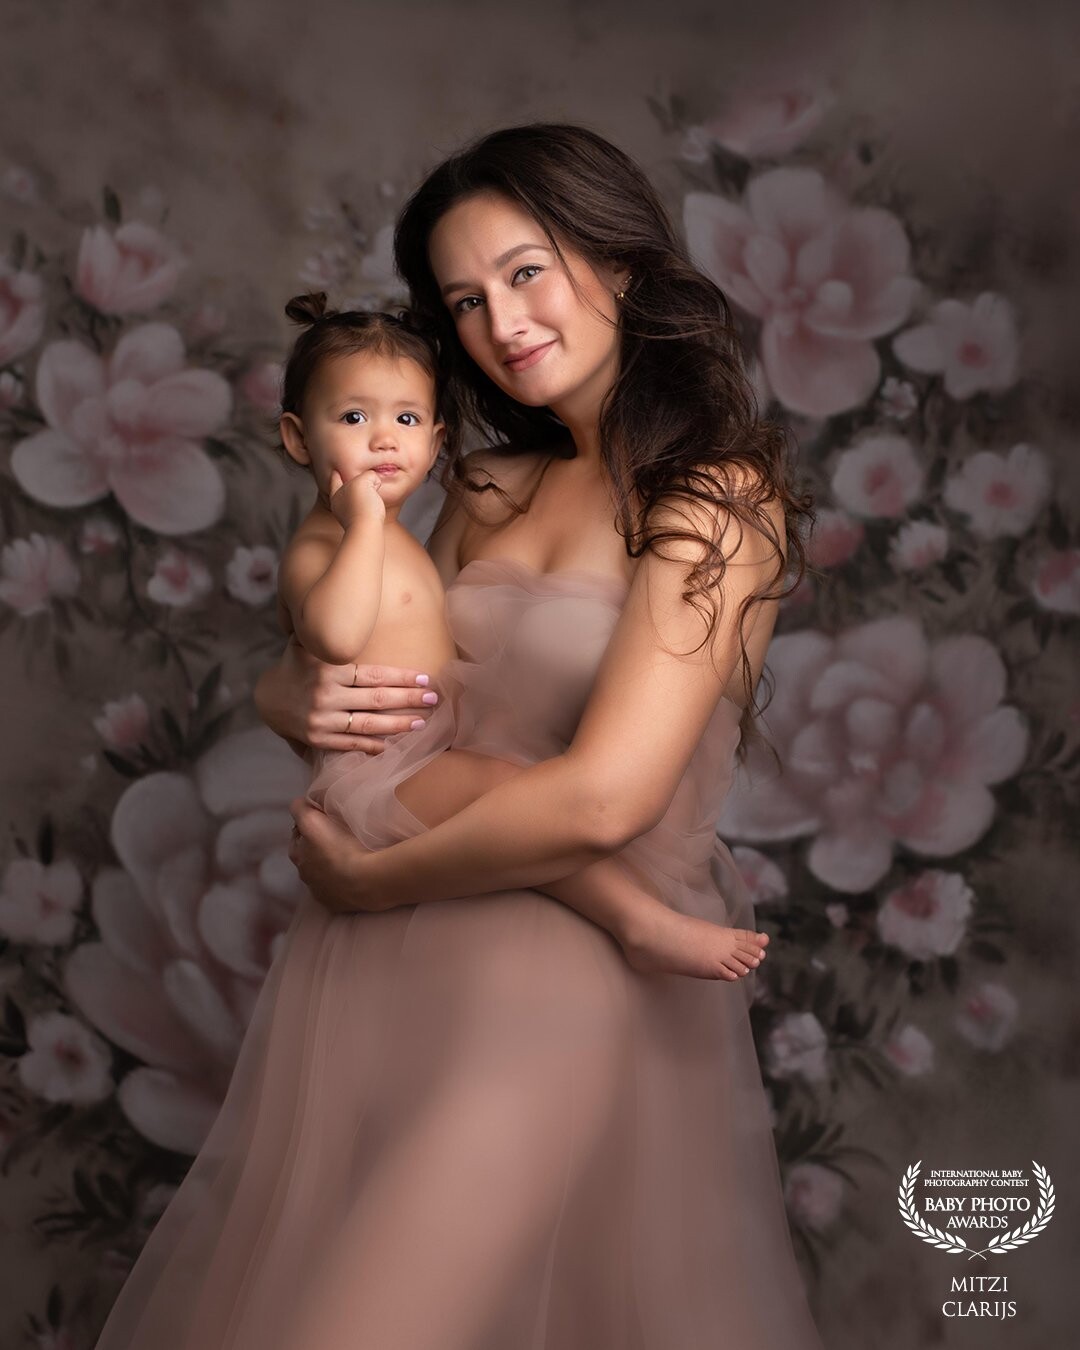 I photographed this mom a couple of times when she was pregnant and I also did her newbornshoot with her family.<br />
Now her little baby is 1,5 years old and how lovely to see them again at this mommy & mini shoot!